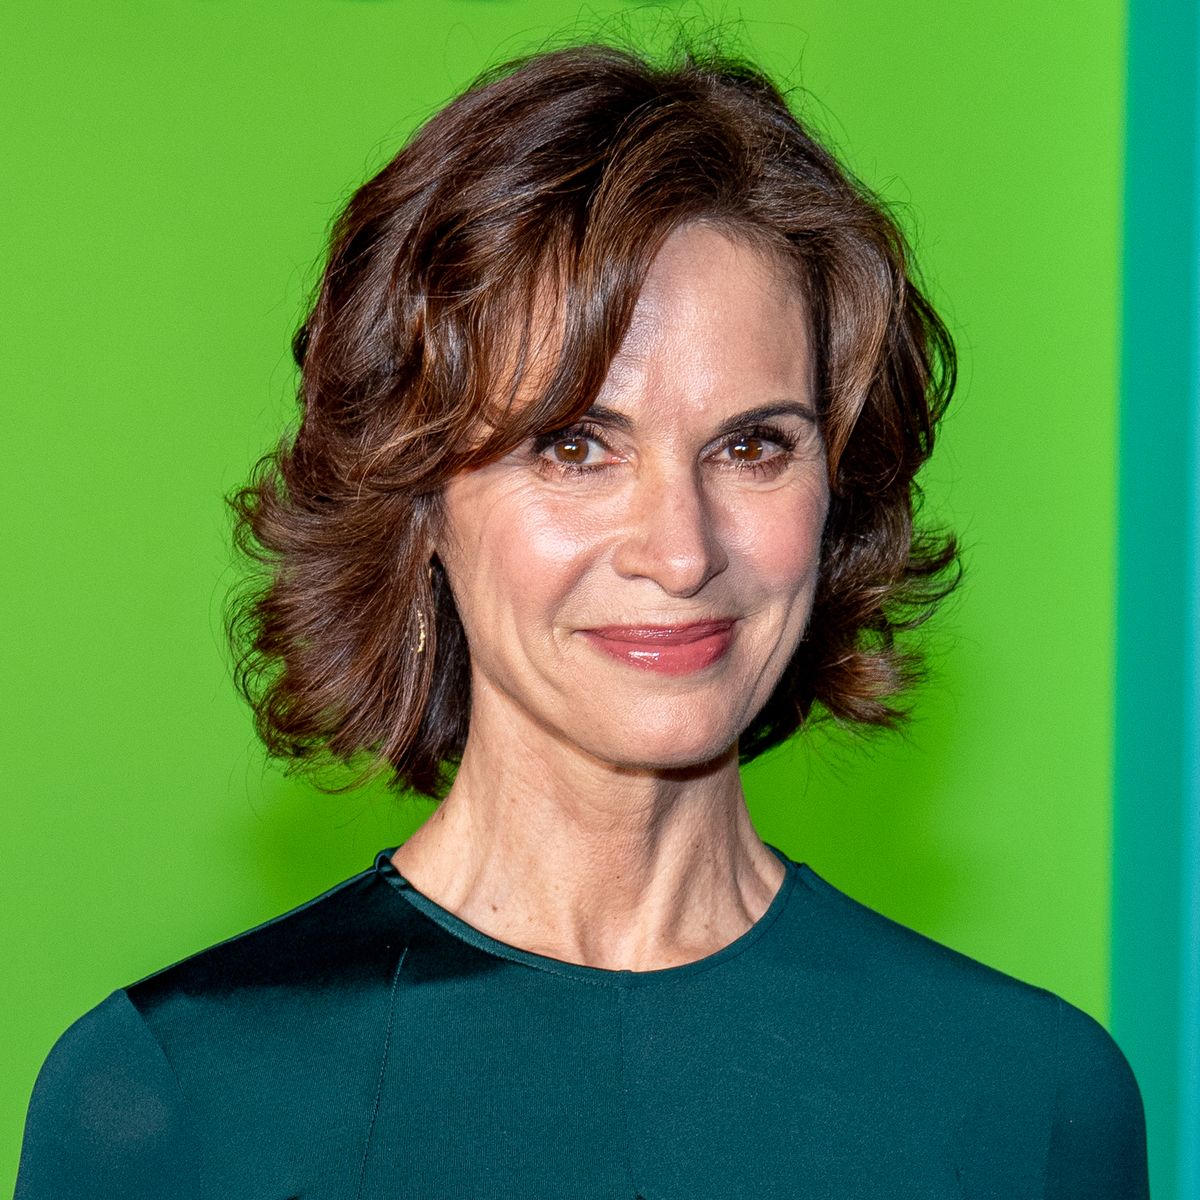 Apple TV+'s "The Morning Show" World PremiereNEW YORK, NEW YORK - OCTOBER 28: Elizabeth Vargas attends Apple TV+'s "The Morning Show" world premiere at David Geffen Hall on October 28, 2019 in New York City. (Photo by Roy Rochlin/WireImage)